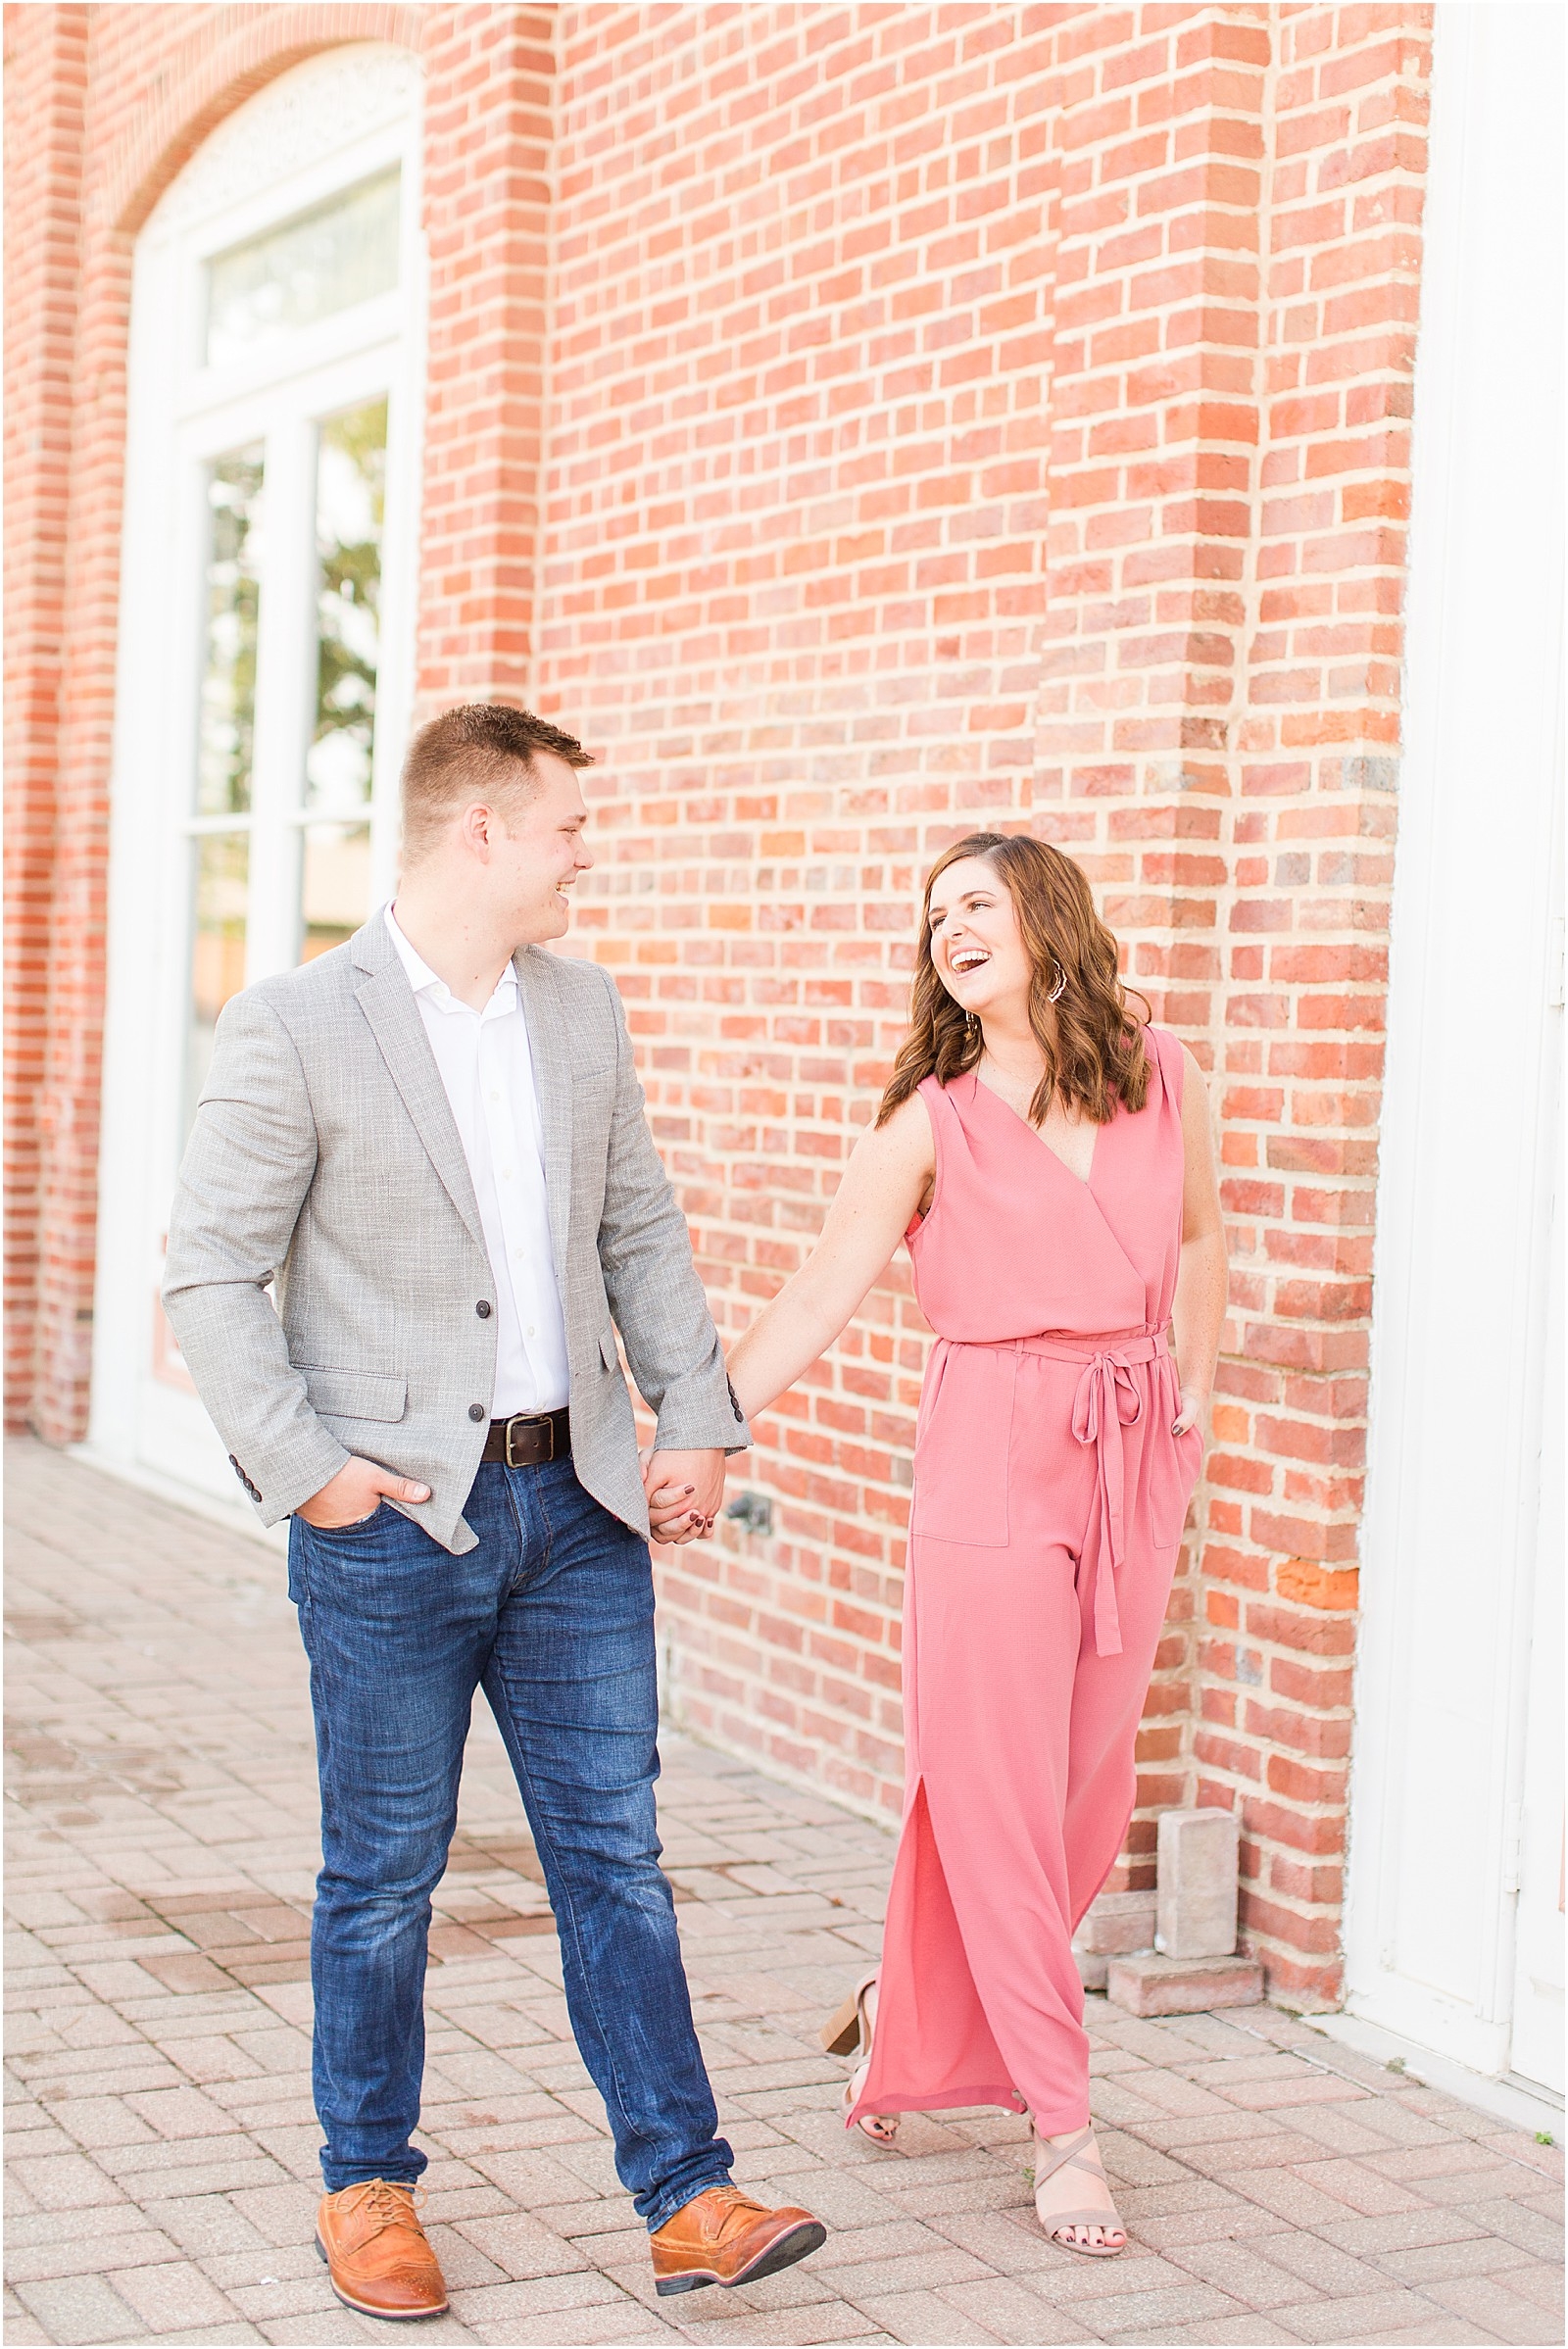 Downtown Huntingburgh Engagement Session | Gabby and Aidan | Bret and Brtandie Photography 008.jpg